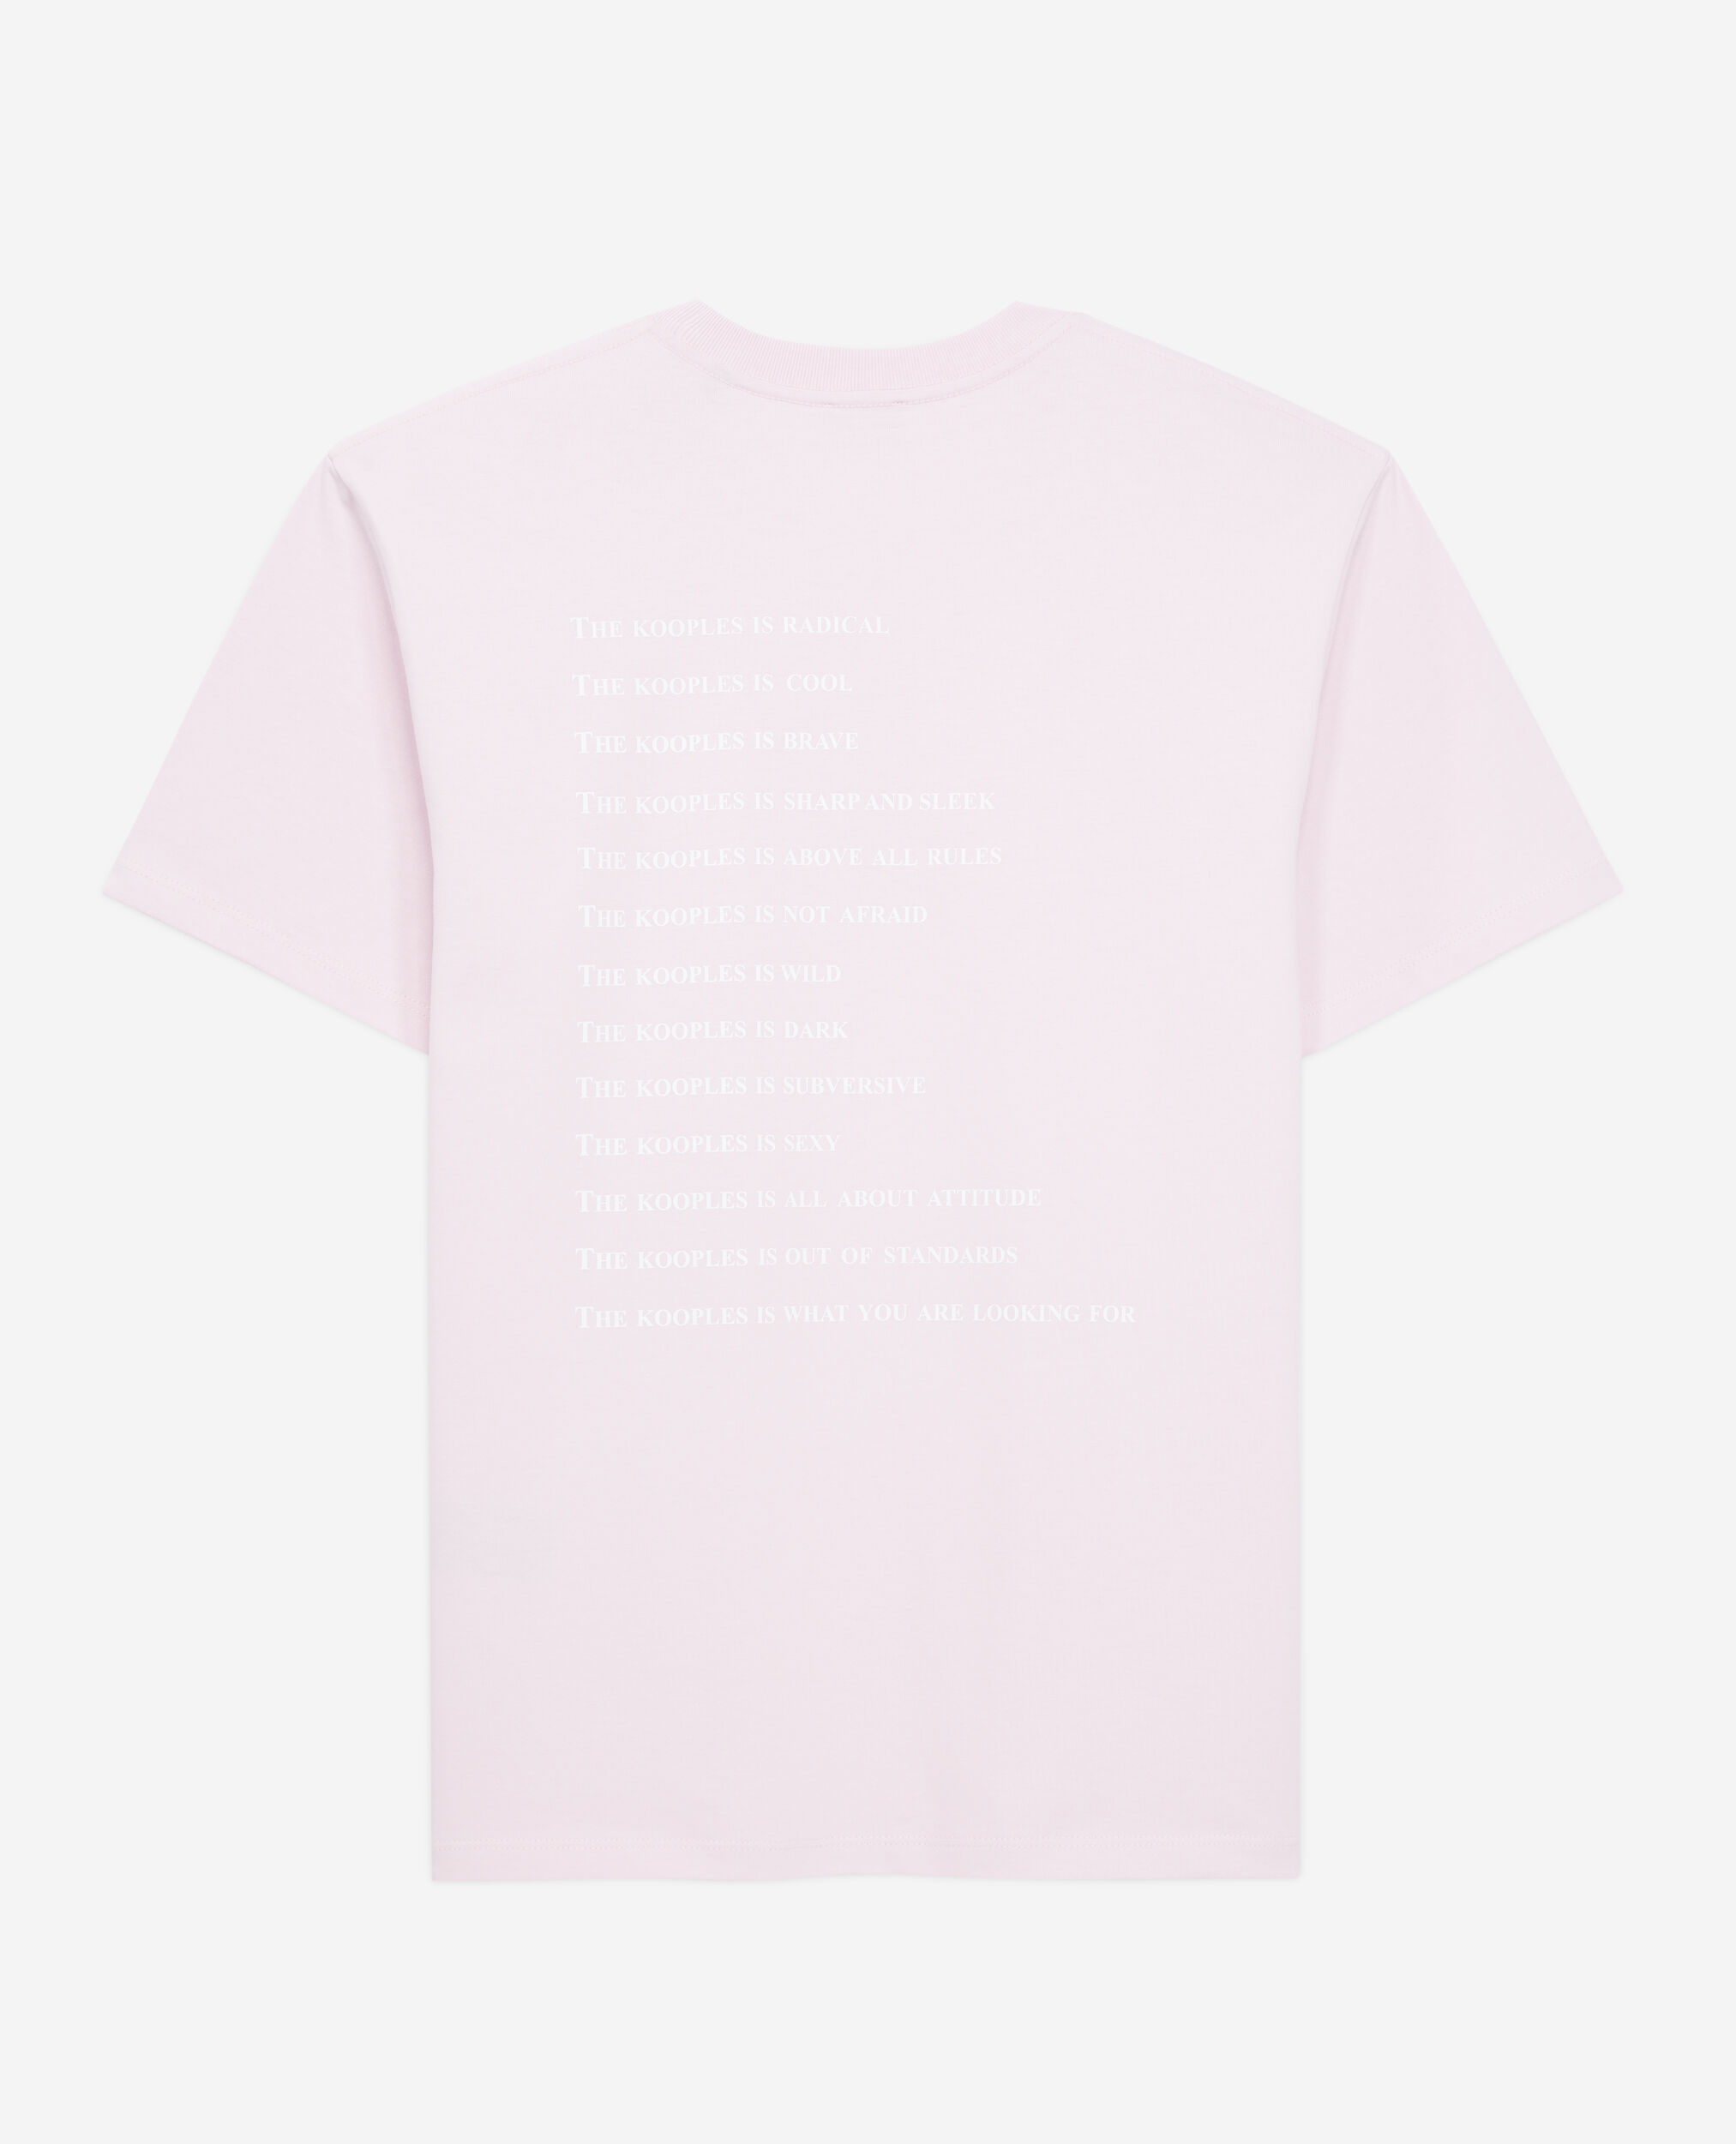 Rosa T-Shirt mit „What is“-Schriftzug, PALE PINK, hi-res image number null